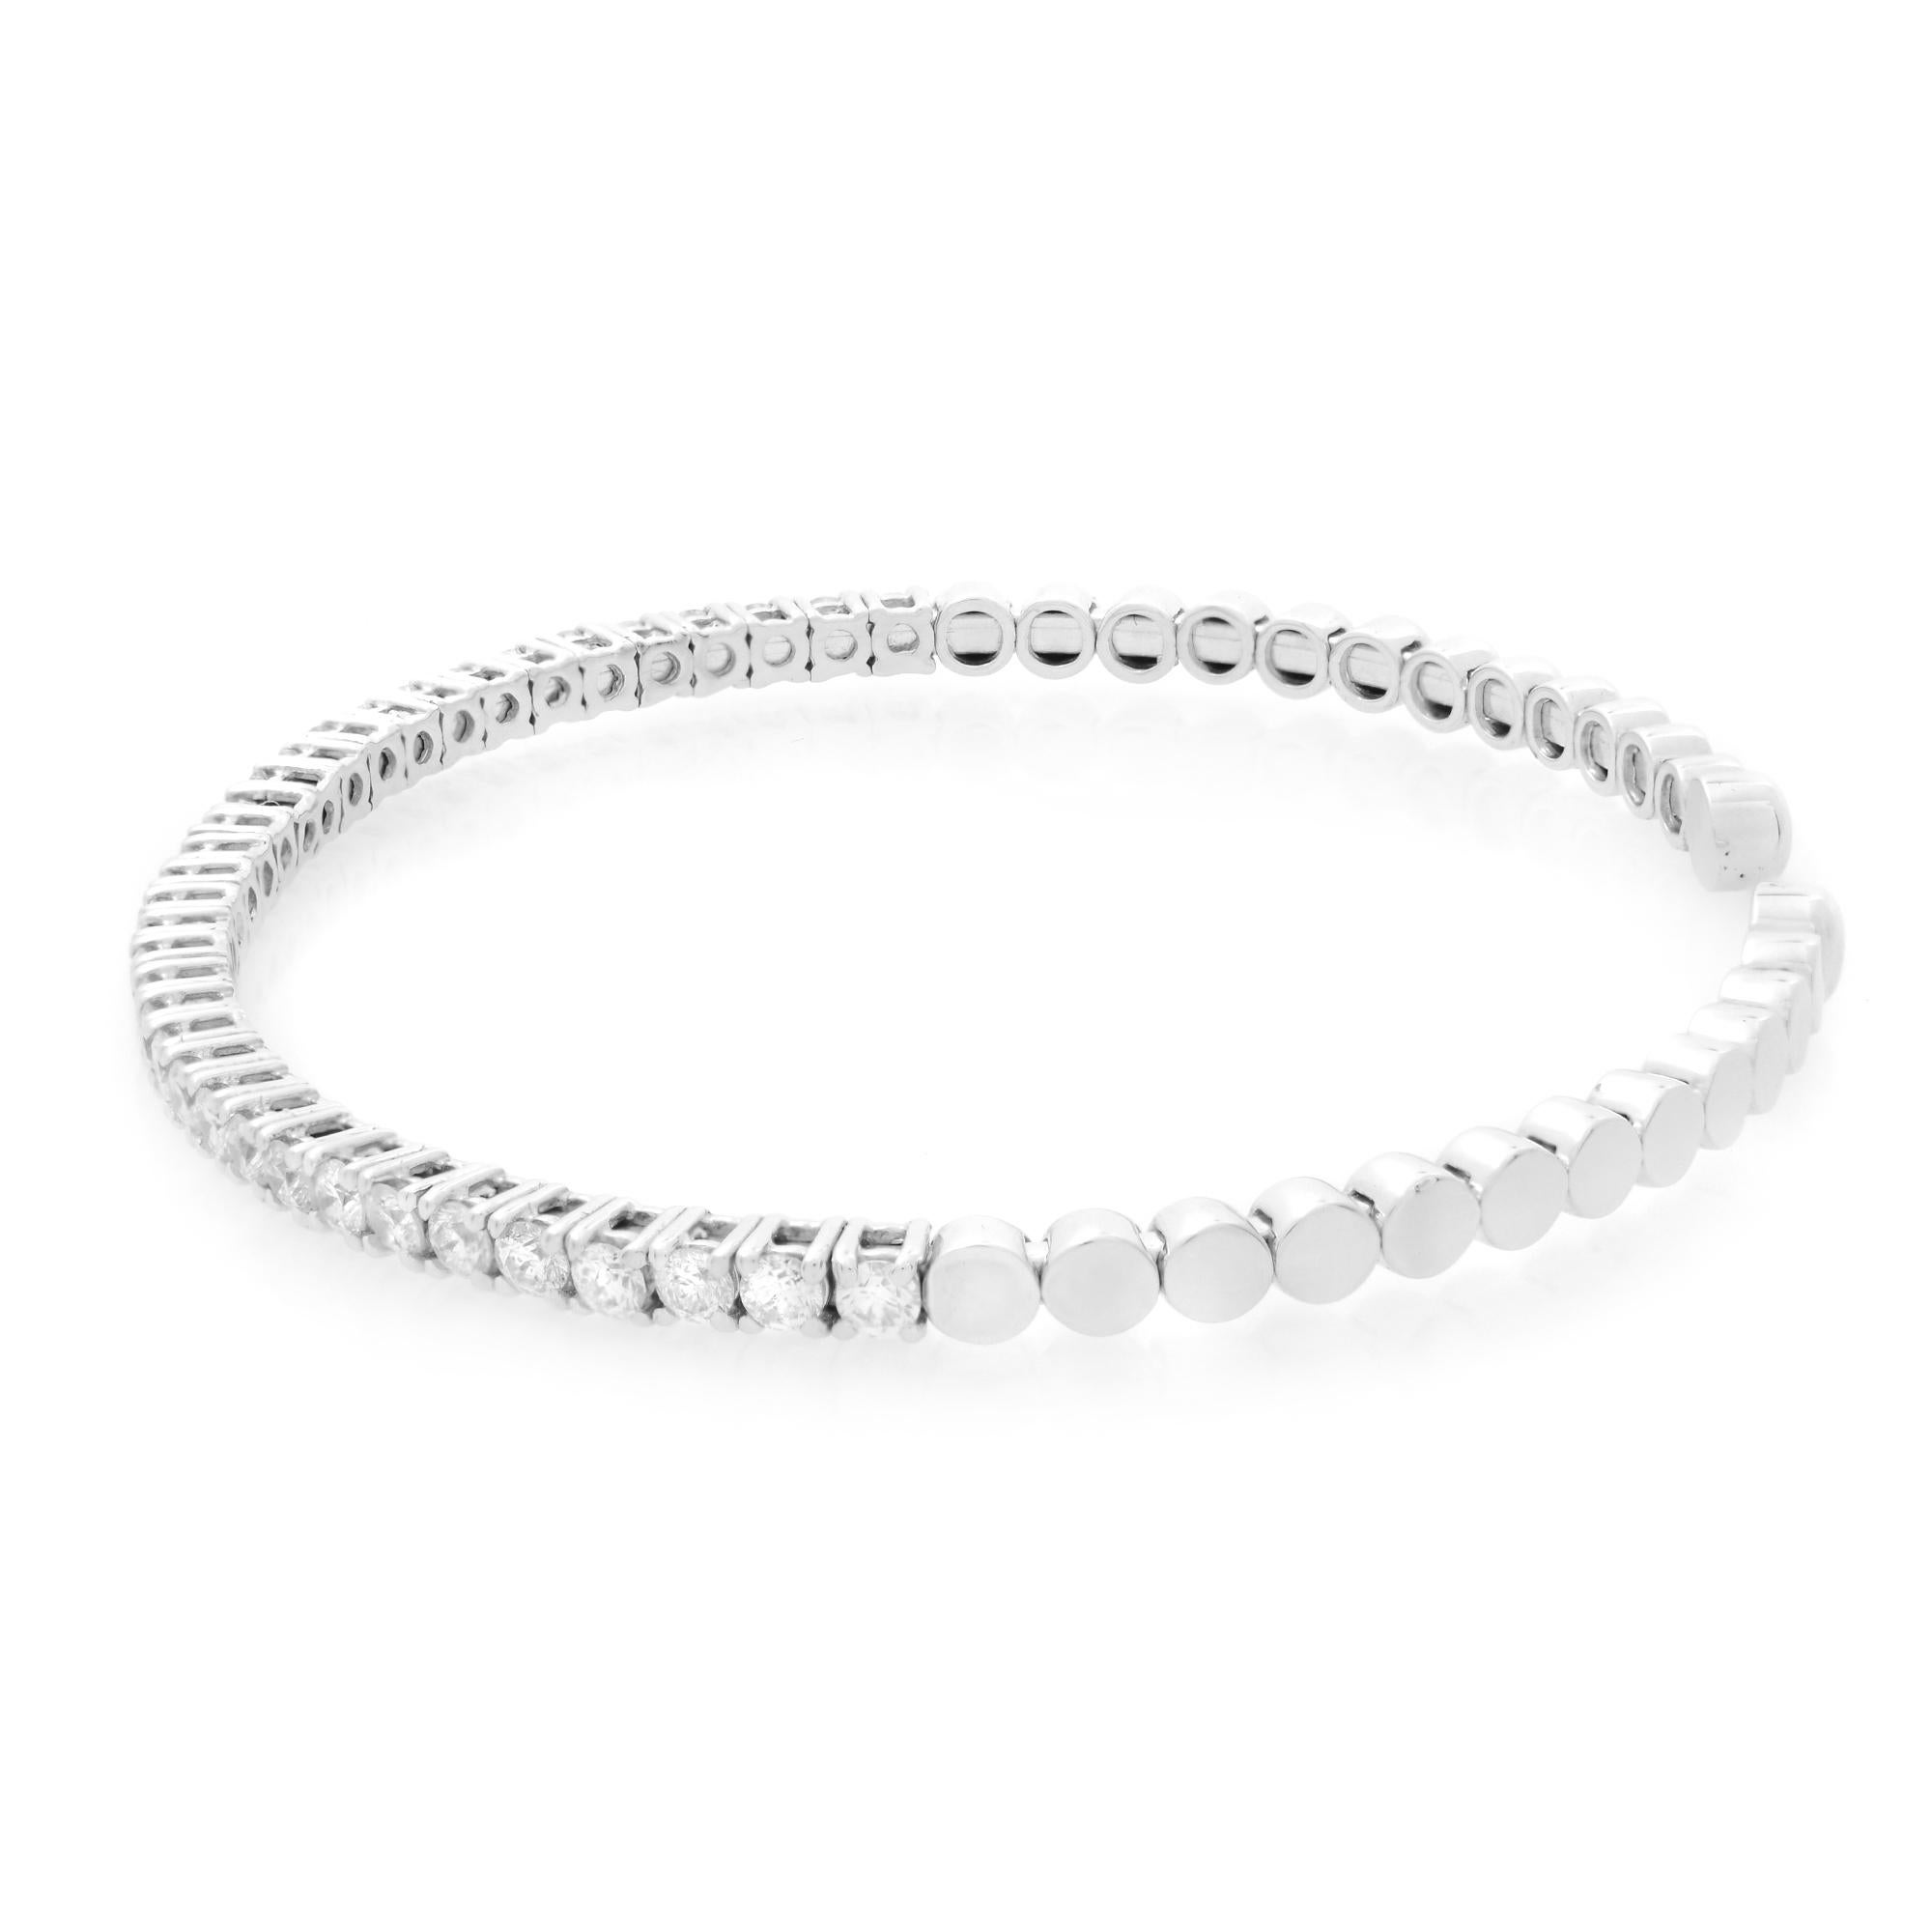 14K white gold diamond cuff bangle bracelet. This solid gold fashion bracelet features 1.88 carat of prong set round diamonds. Color I and SI-I clarity. Solid  white gold high polished circles finish the bracelet. This flexible style bracelet